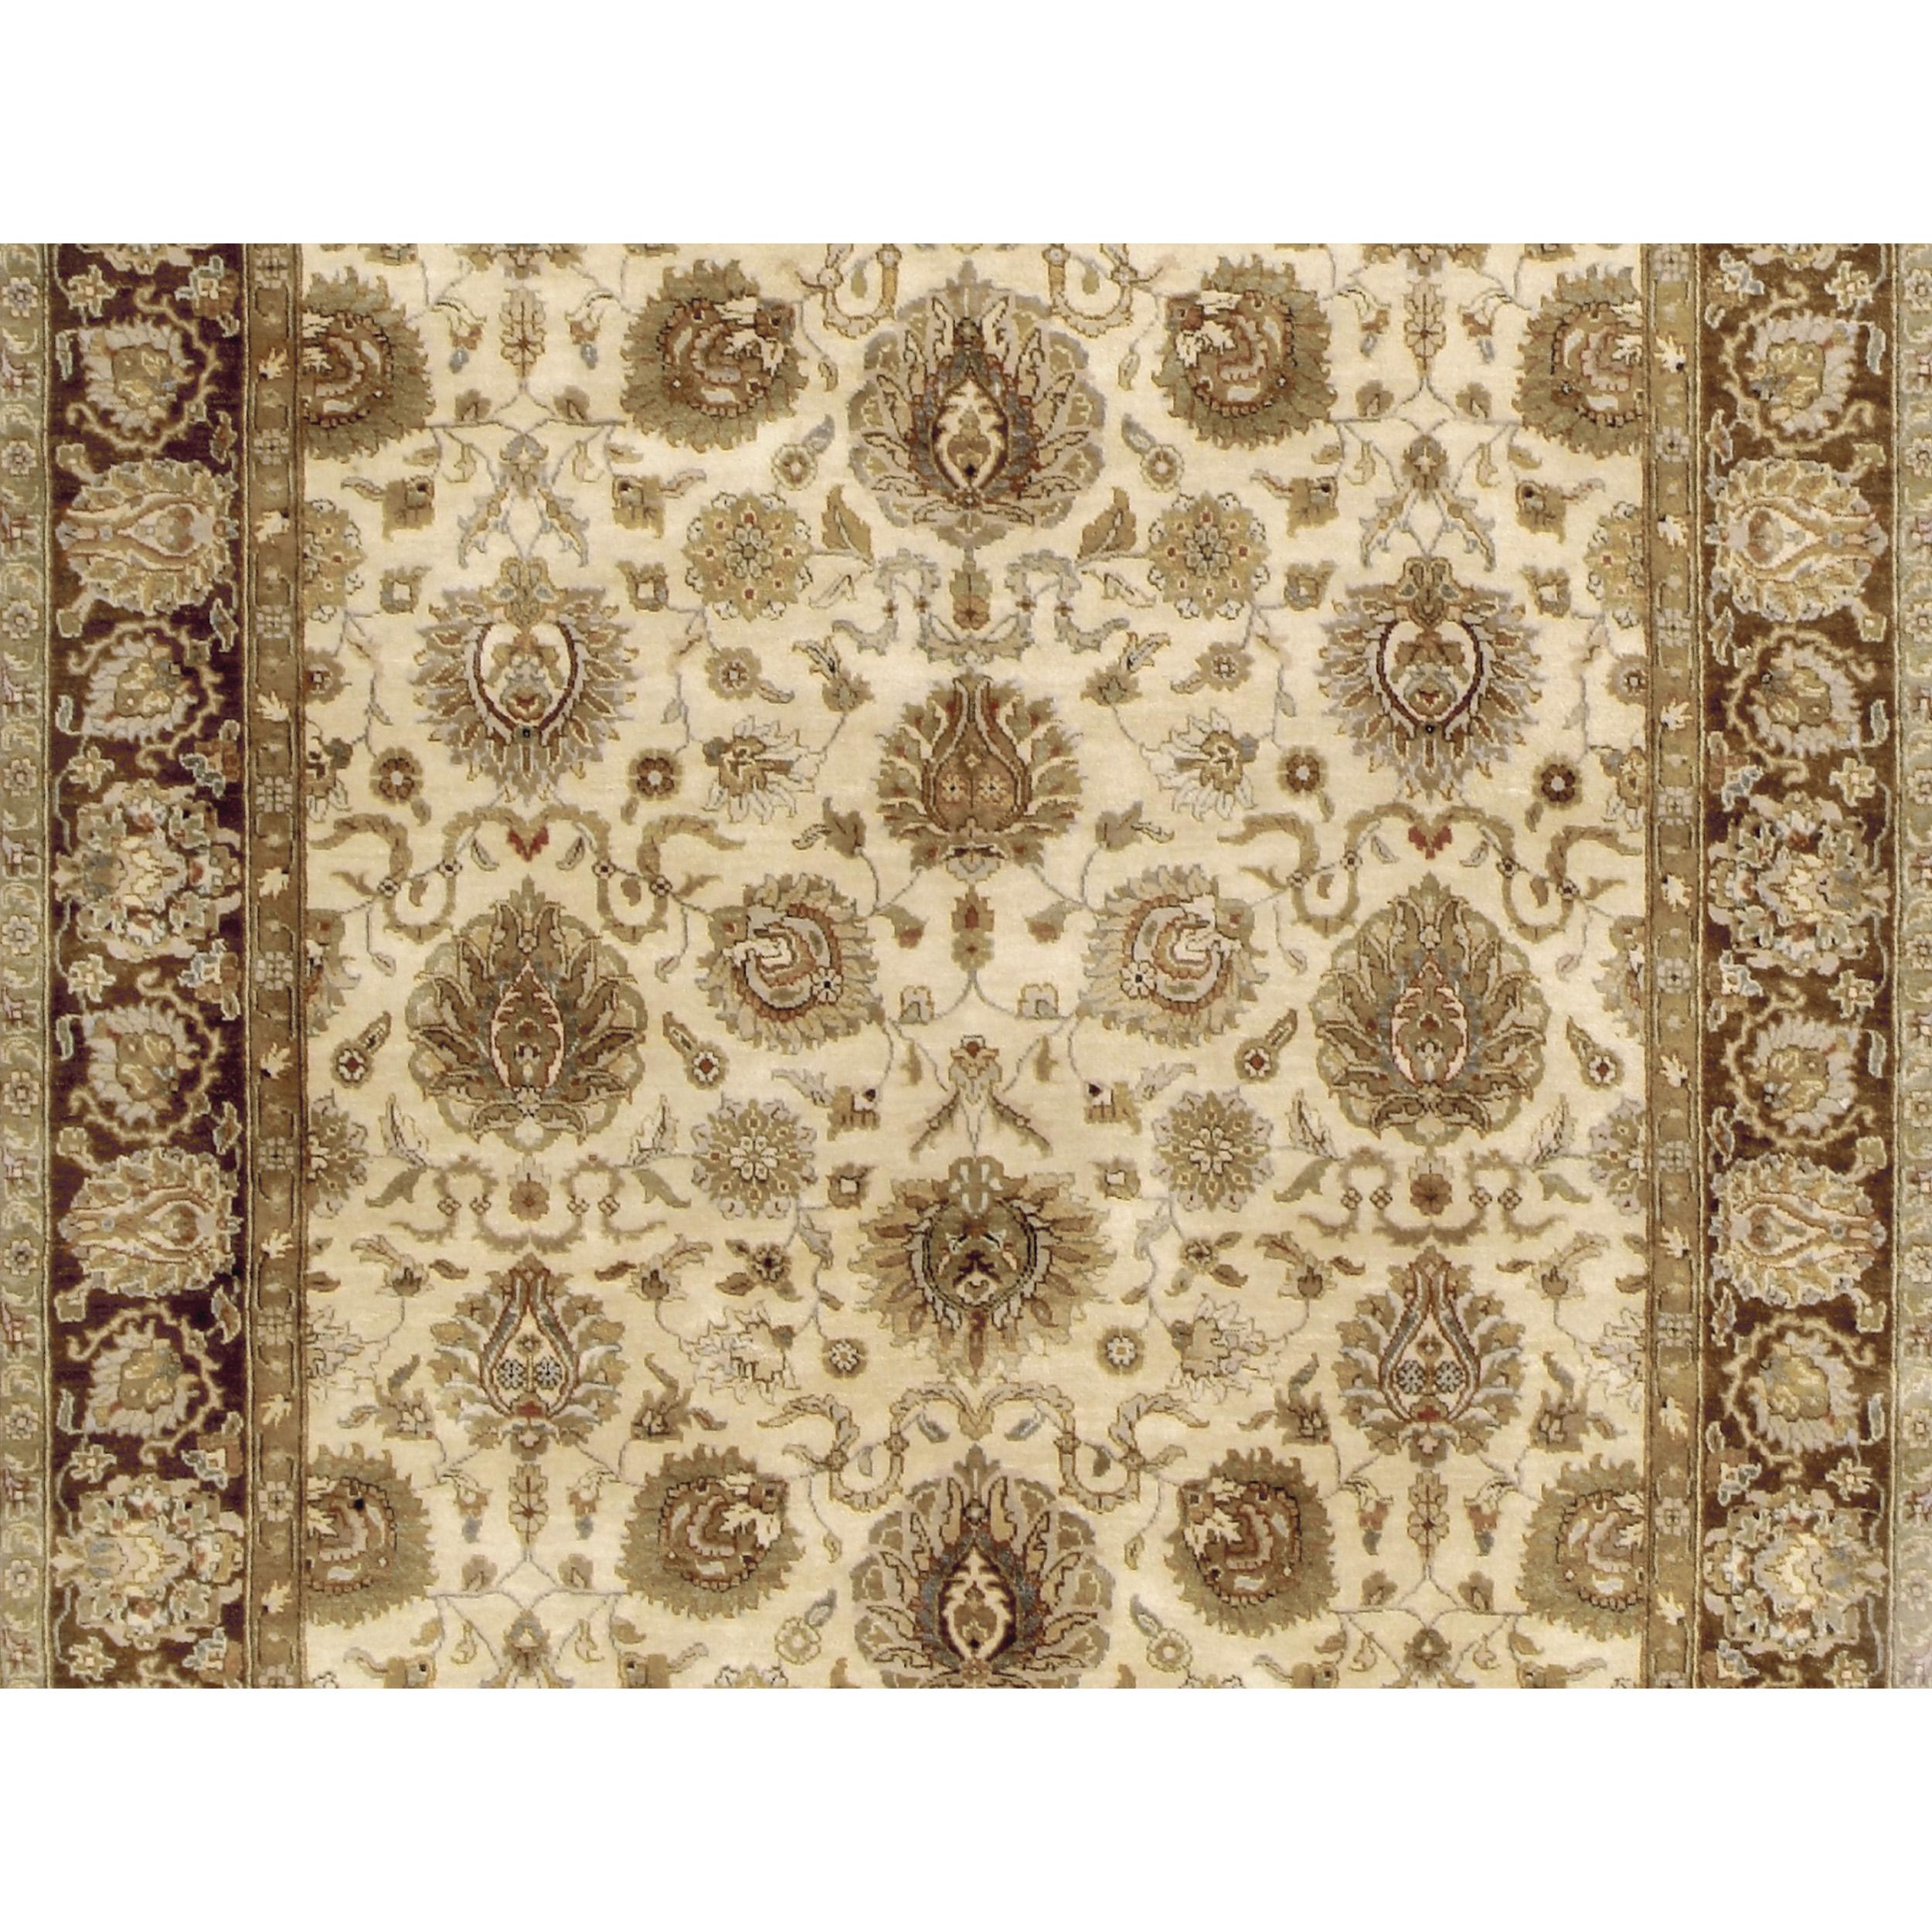 Luxury Traditional Hand-Knotted Sultanabad Cream/Brown 12X18 Rug In New Condition For Sale In Secaucus, NJ